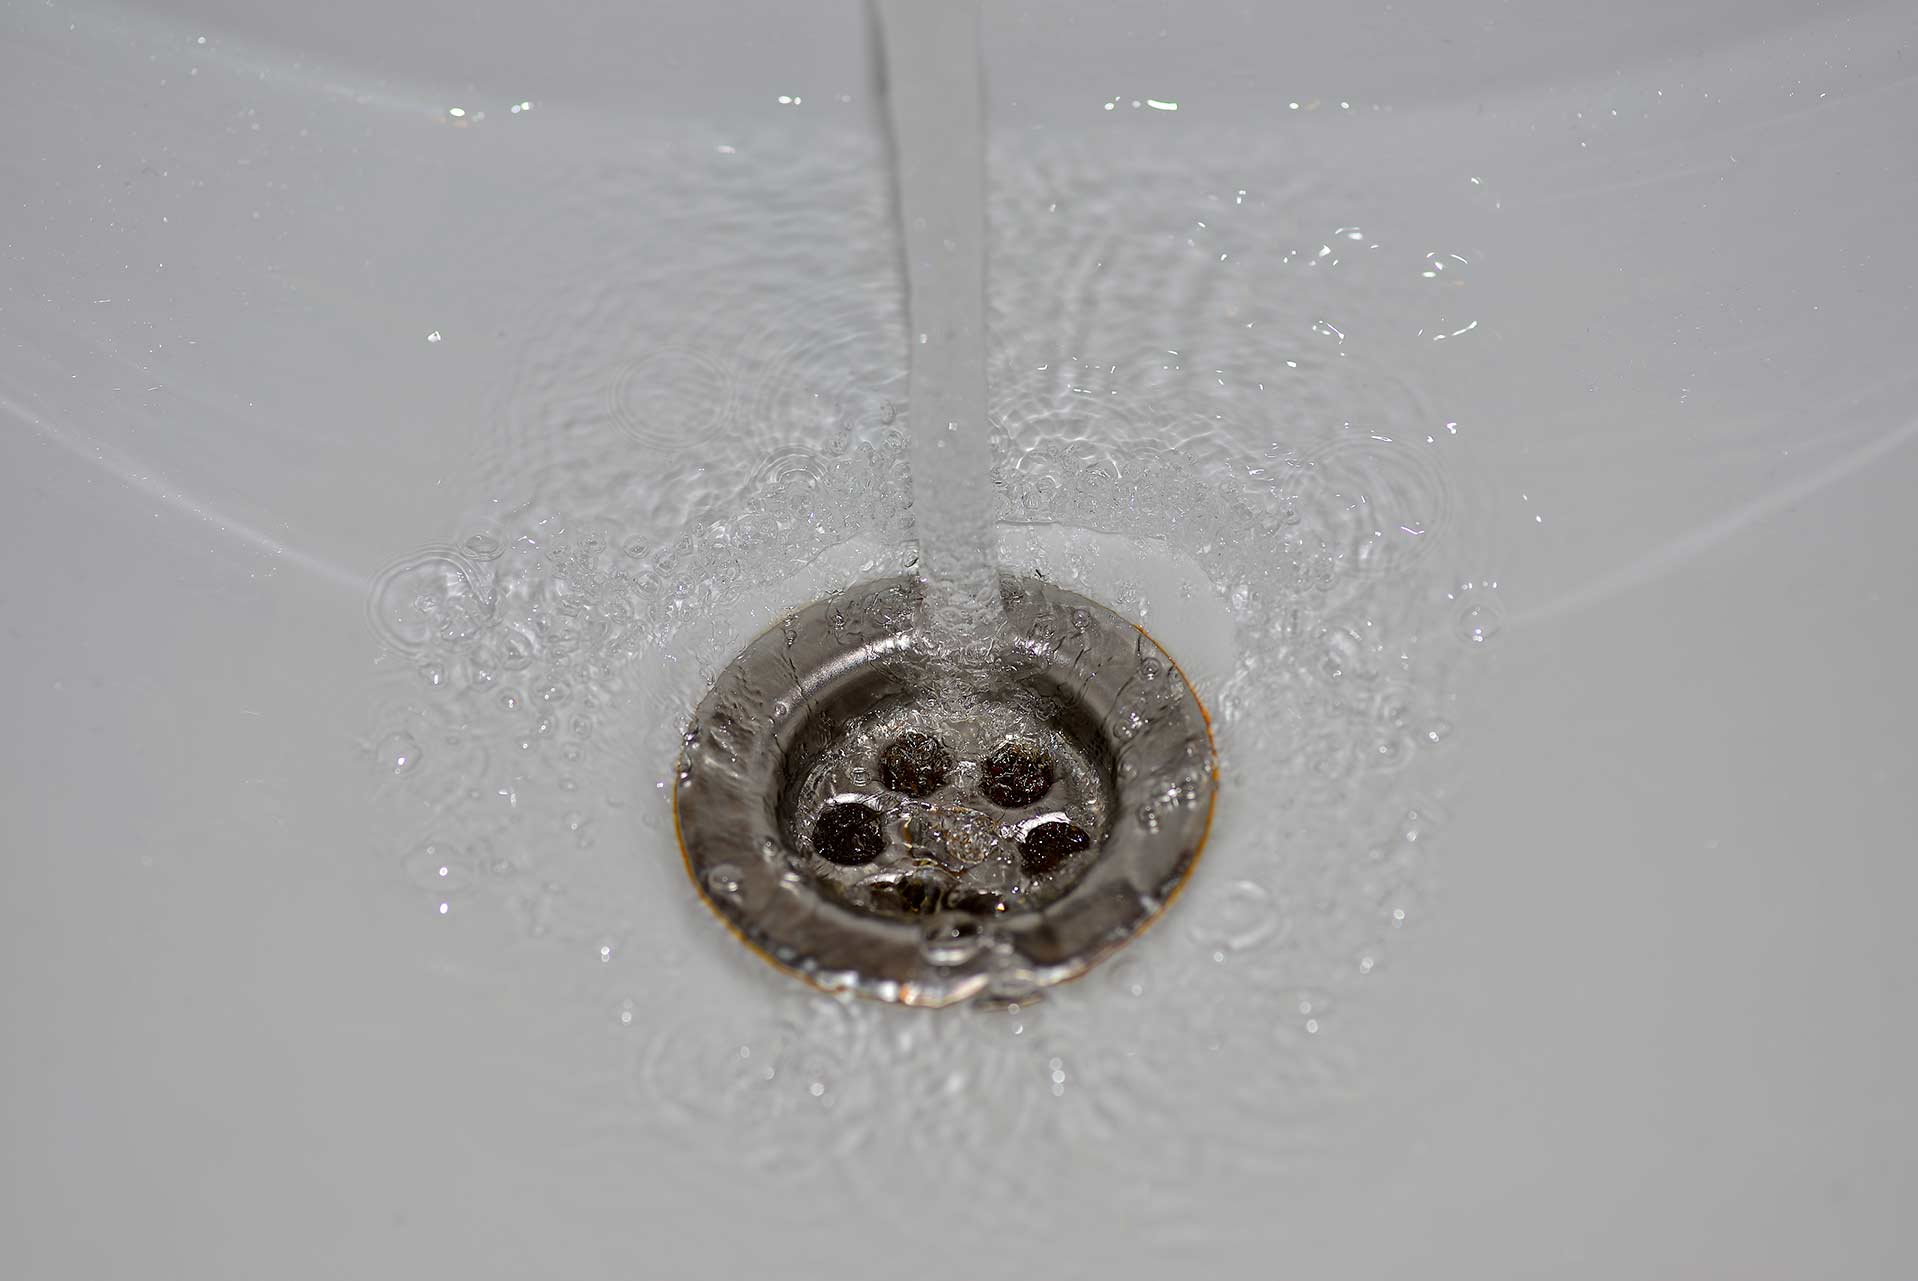 A2B Drains provides services to unblock blocked sinks and drains for properties in Newham.